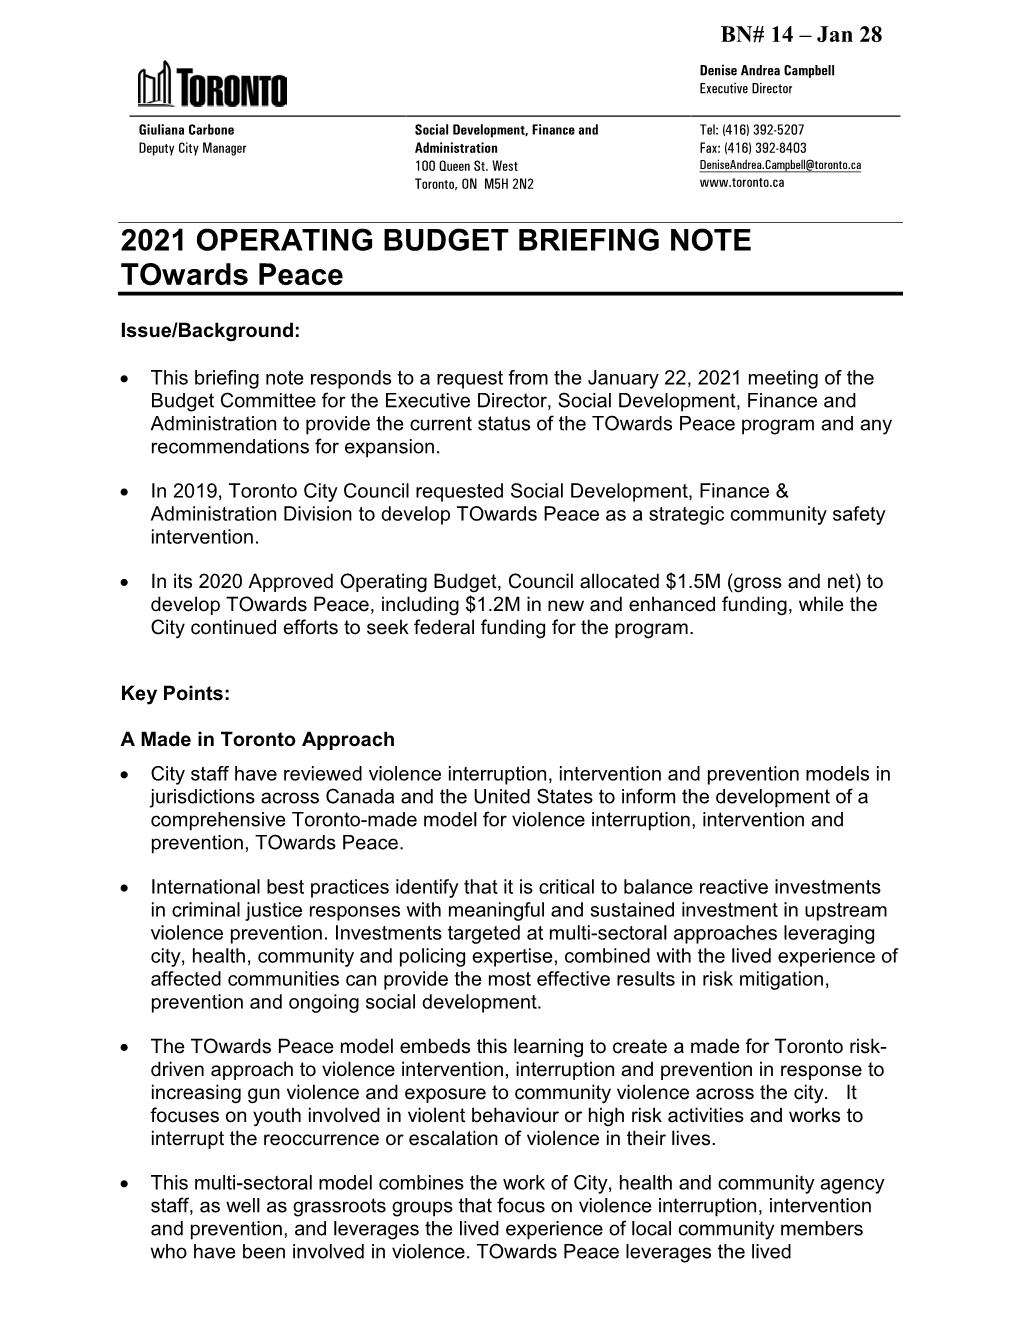 2021 OPERATING BUDGET BRIEFING NOTE Towards Peace